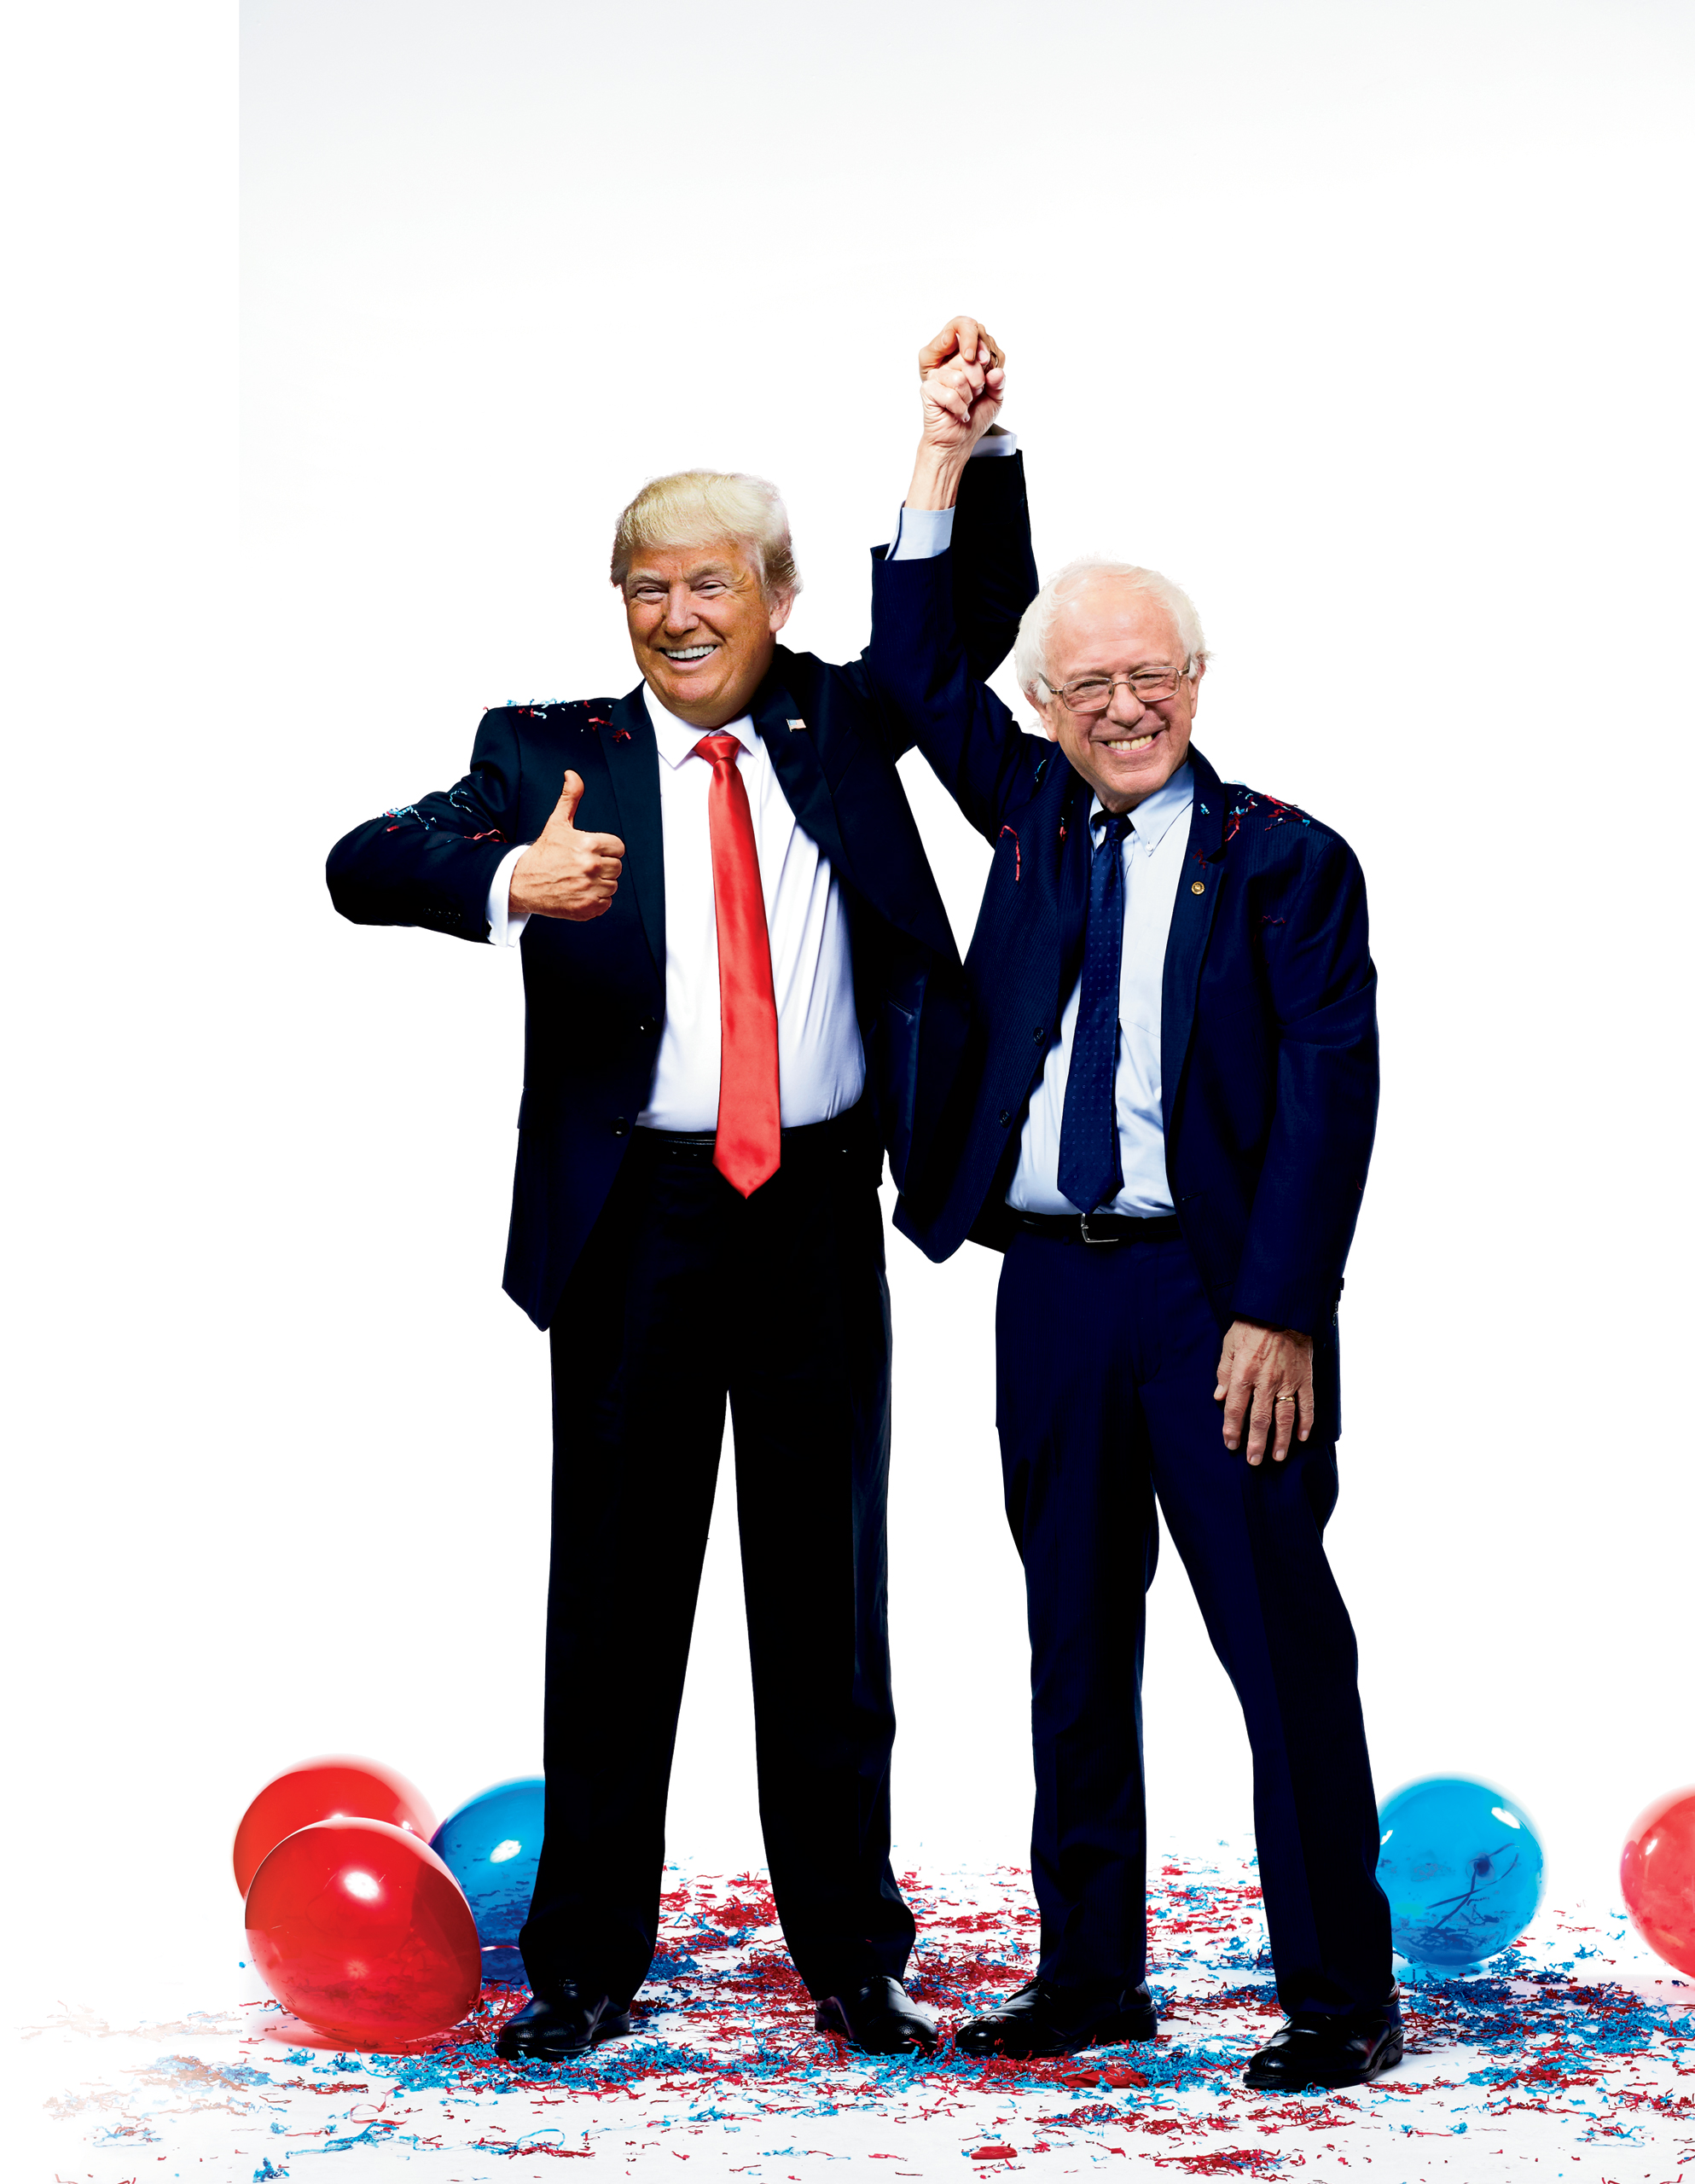 The Trump and Sanders show: Why two outsiders are winning